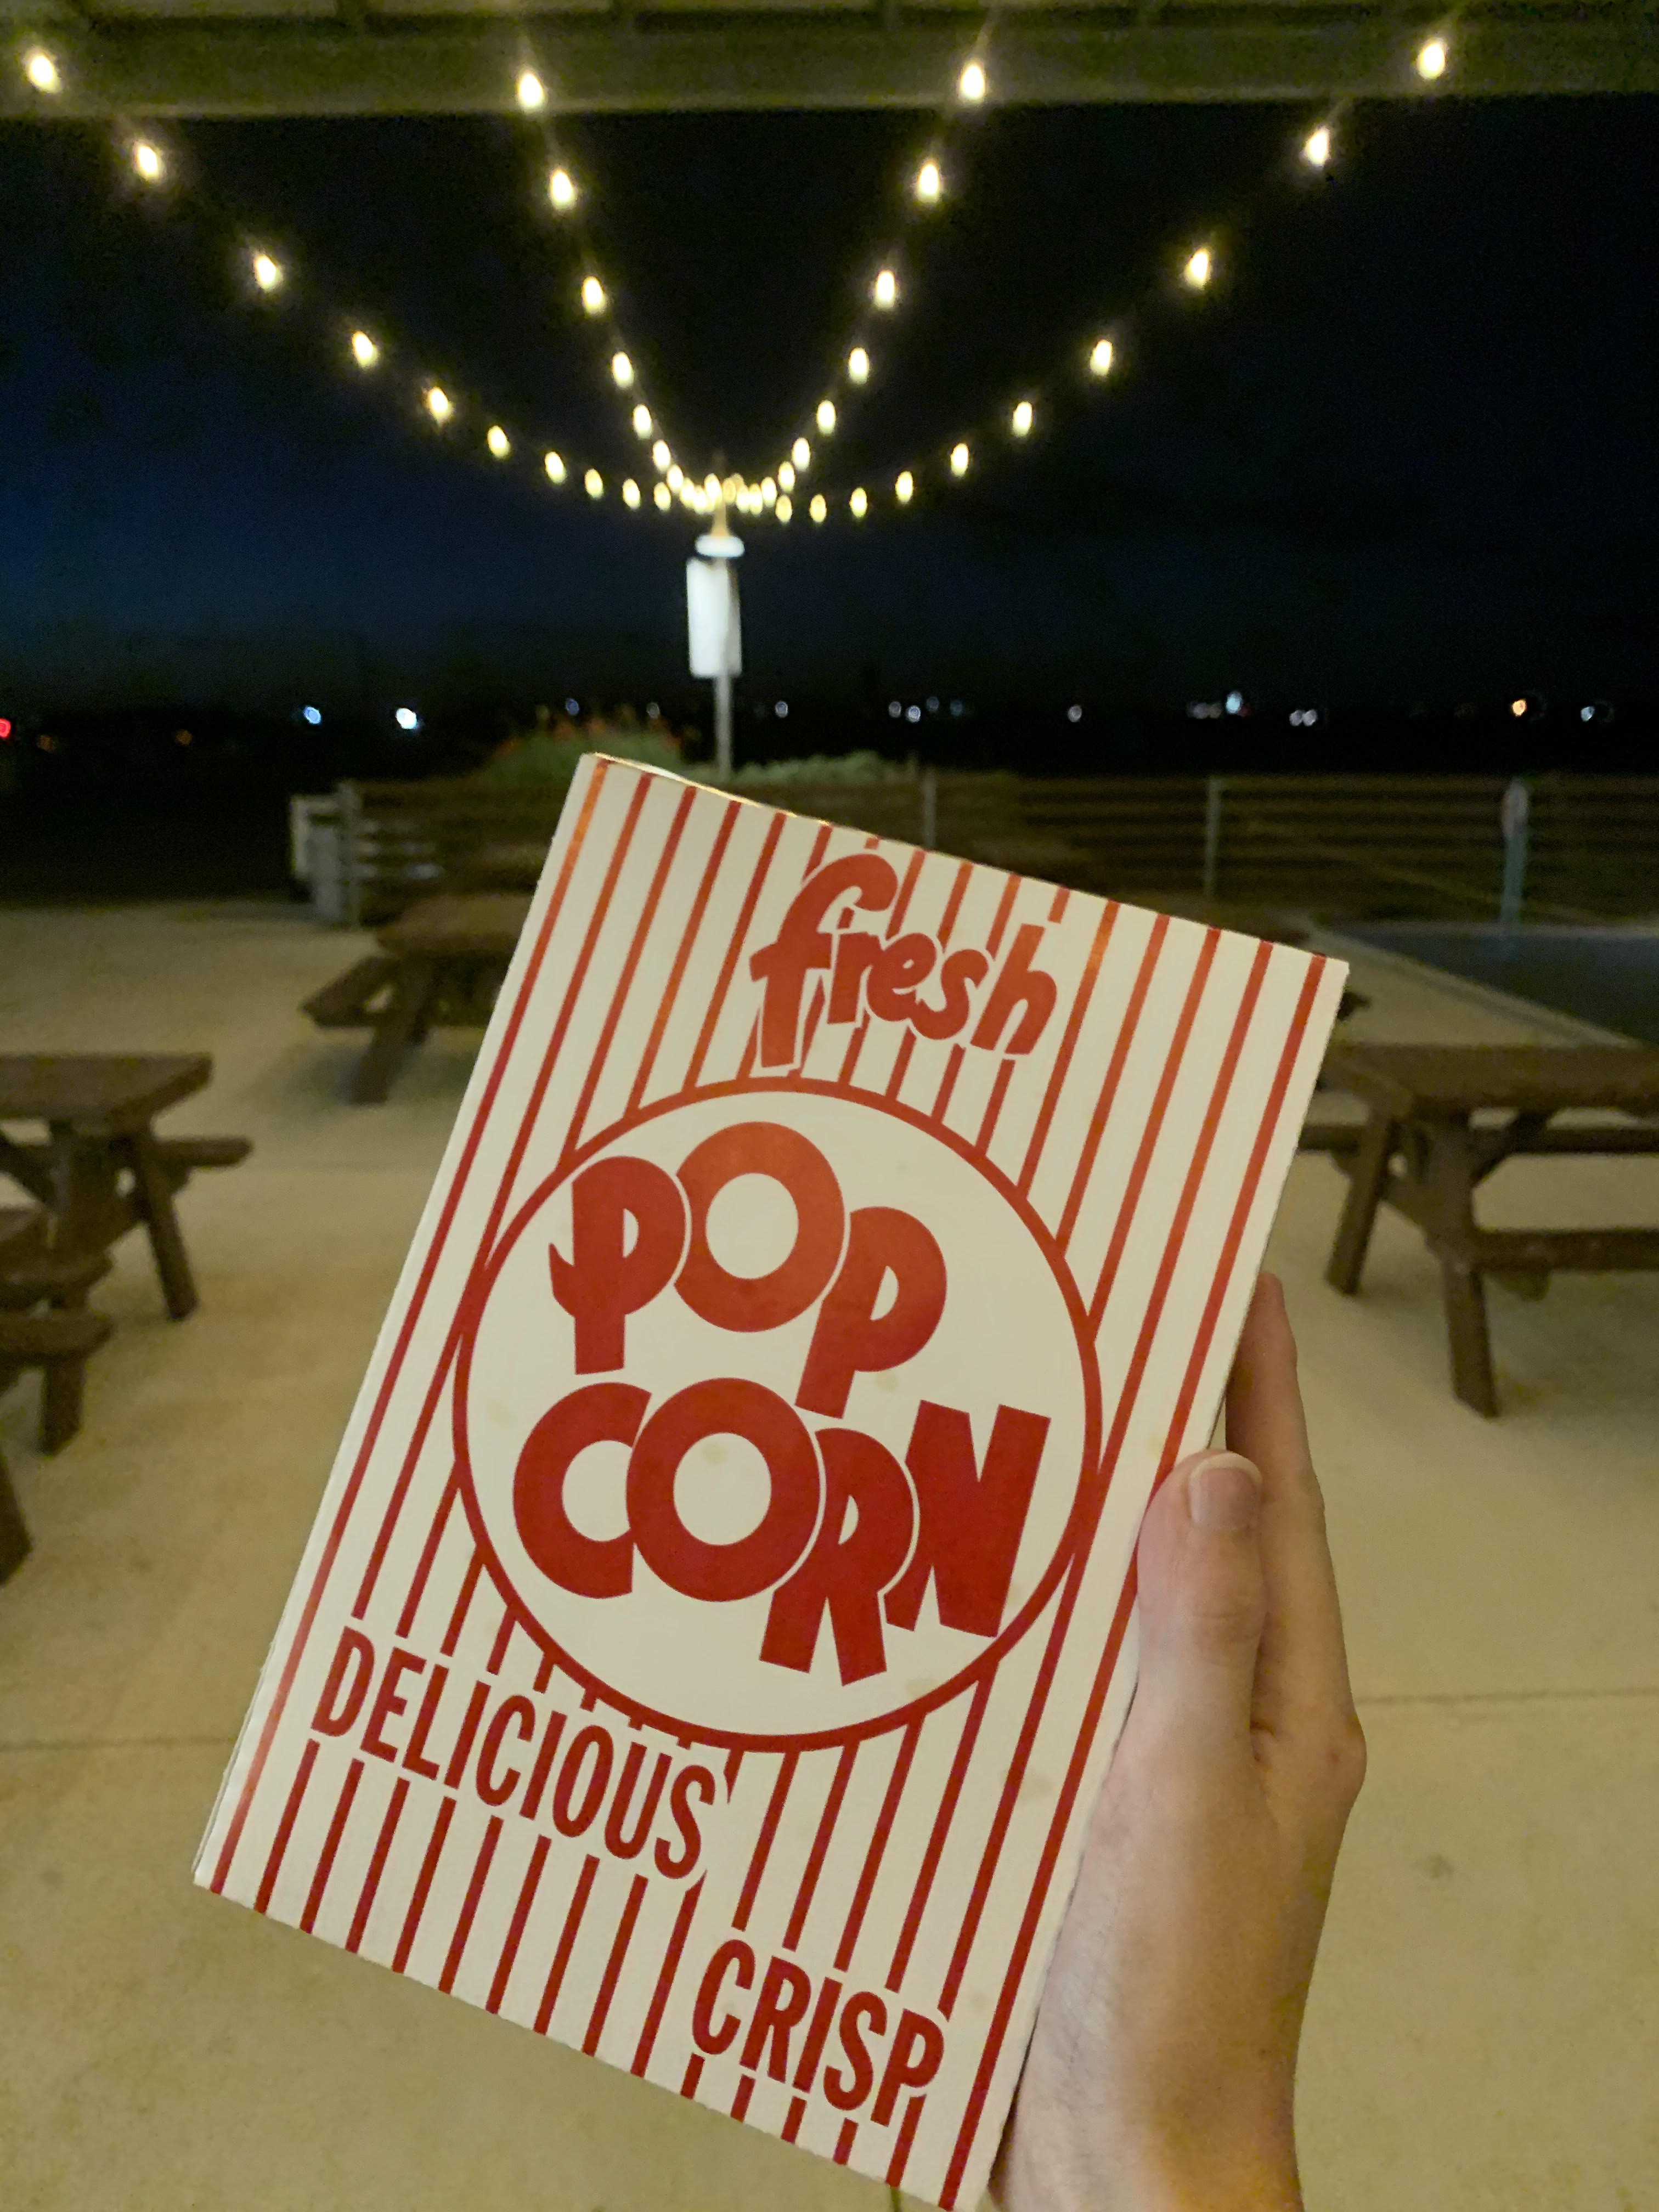 Outside the concession’s stand at Stars and Stripes of some popcorn